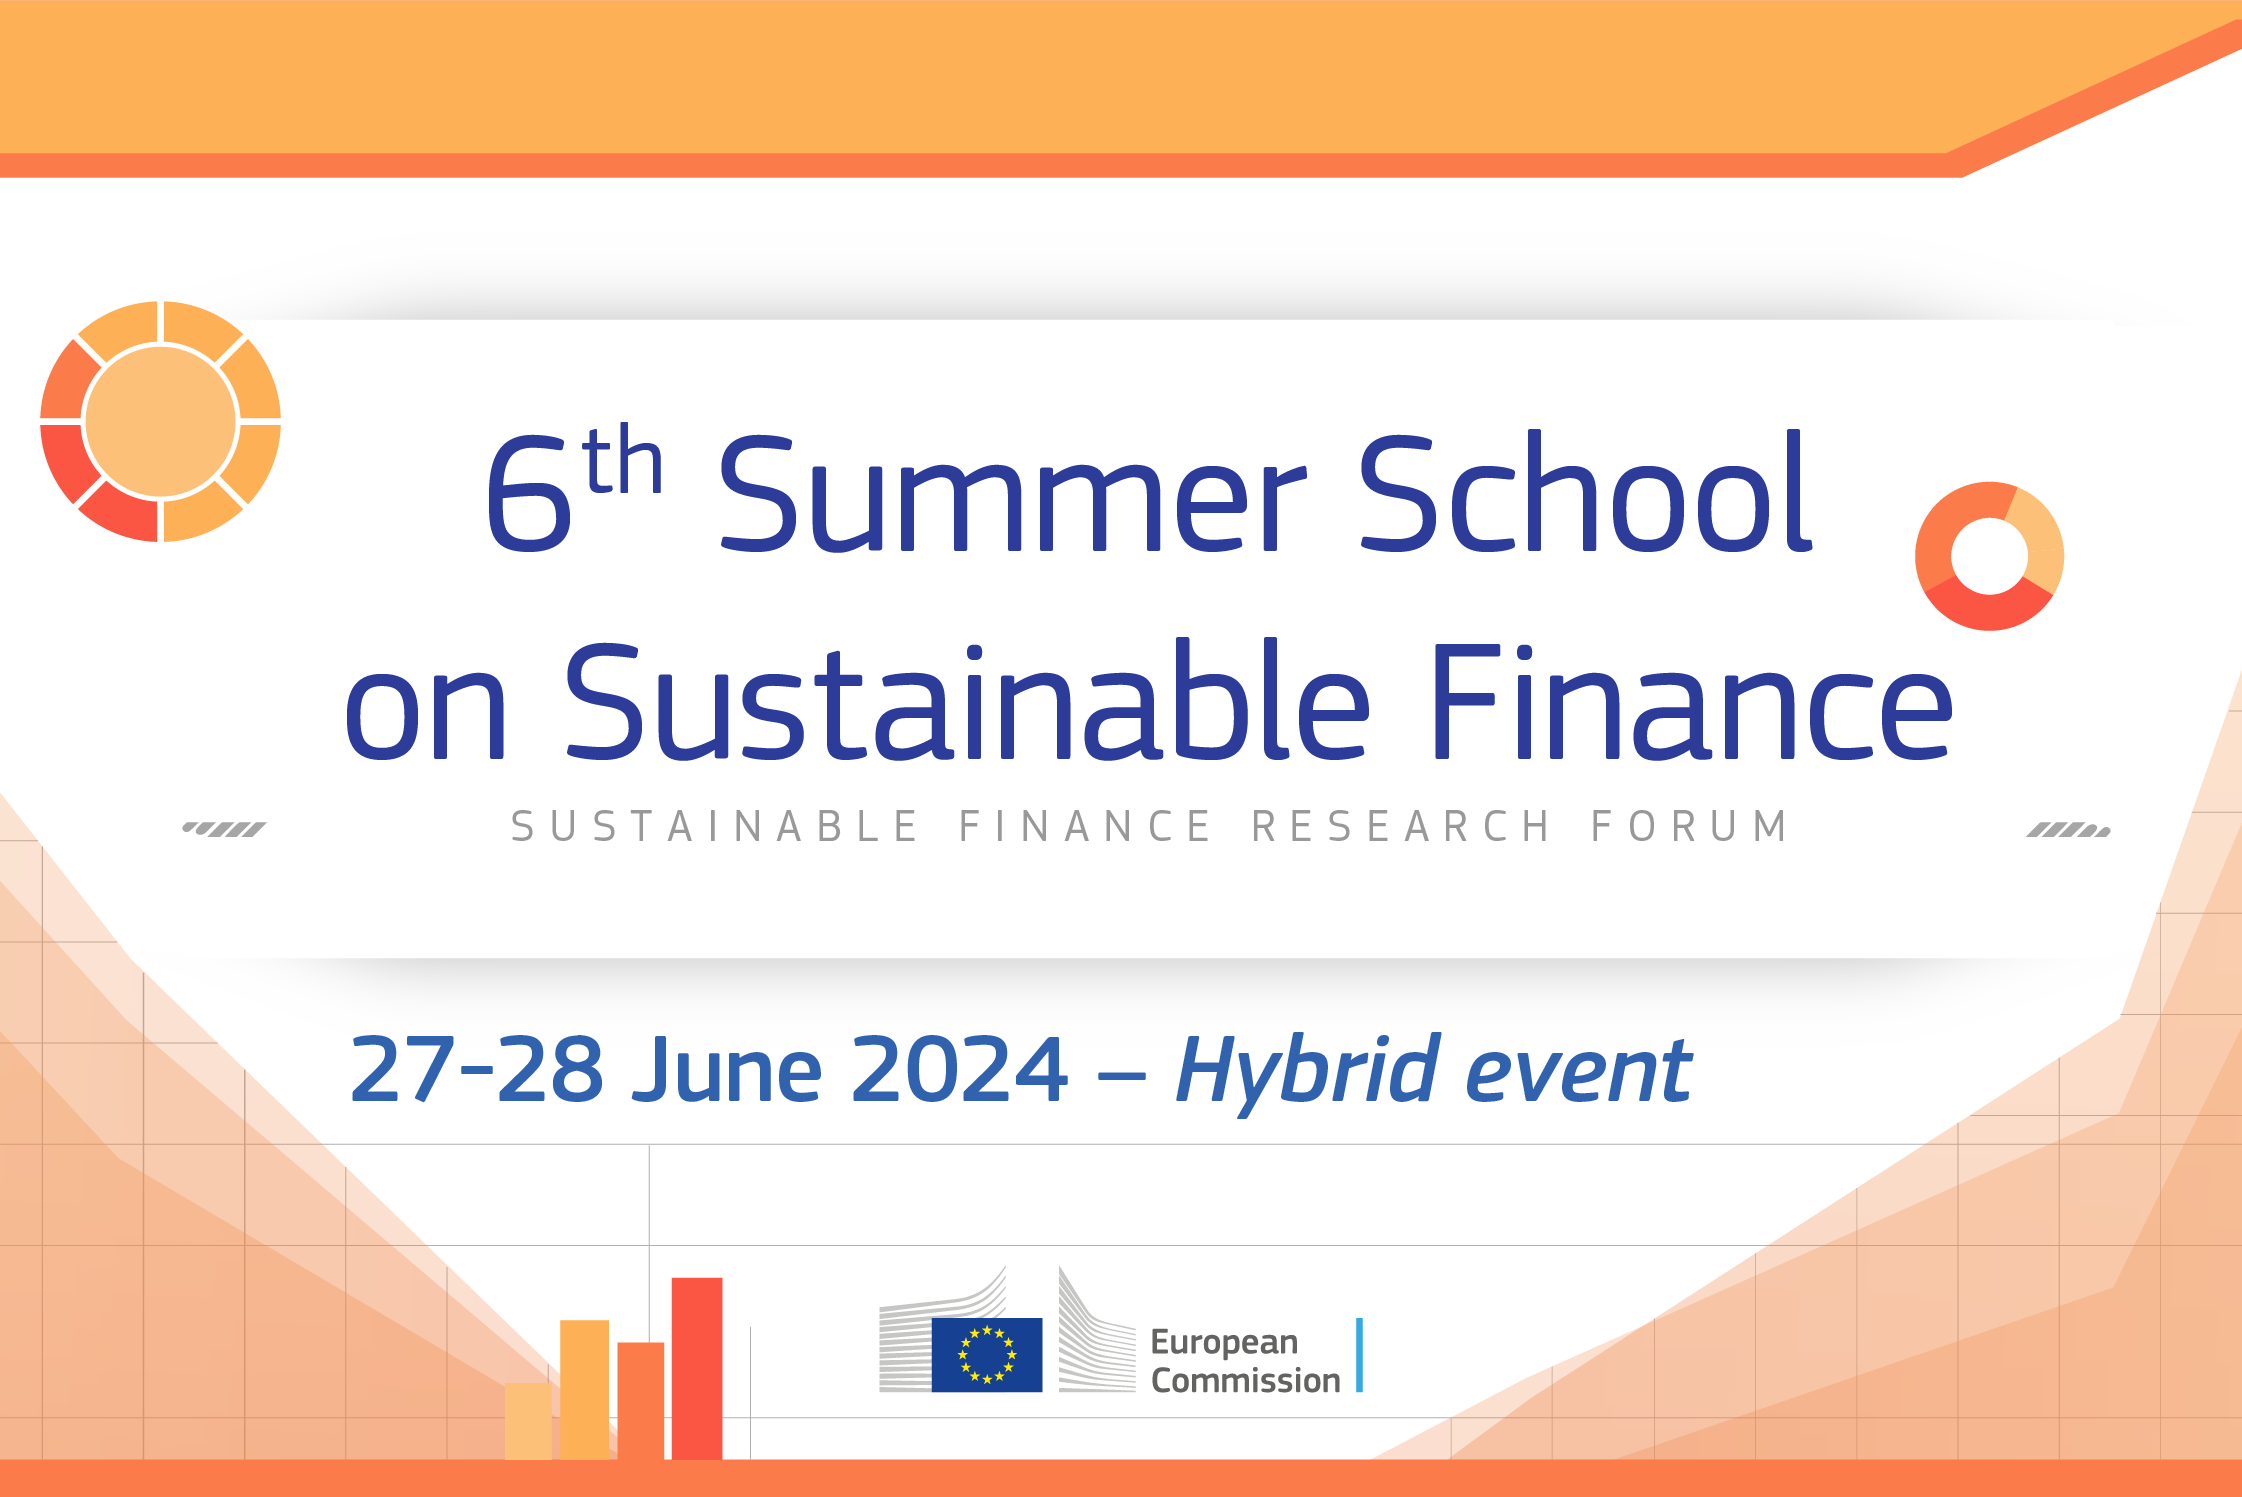 Poster displaying the text "6th Summer School on Sustainable Finance. 27-28 June 2024. Hybrid event"